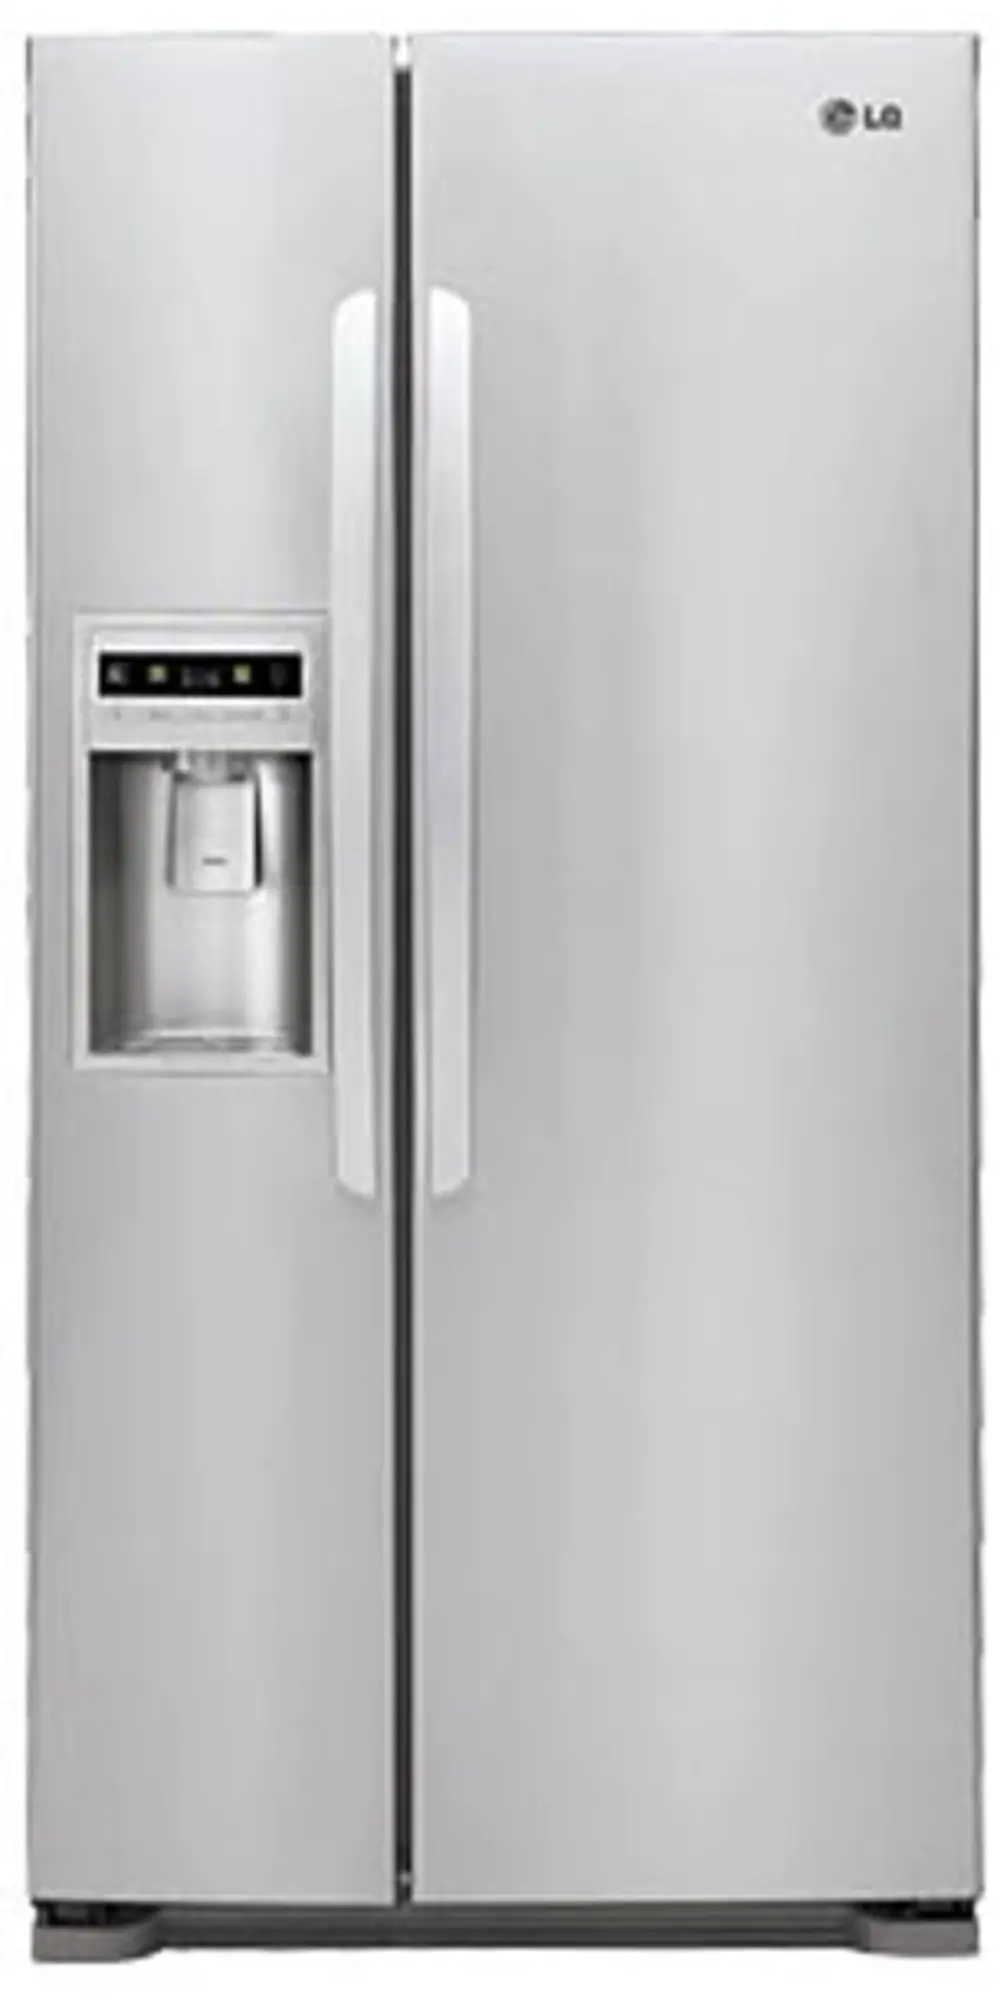 LSC23924ST LG Side-by-Side Refrigerator with Ice & Water Dispenser-1